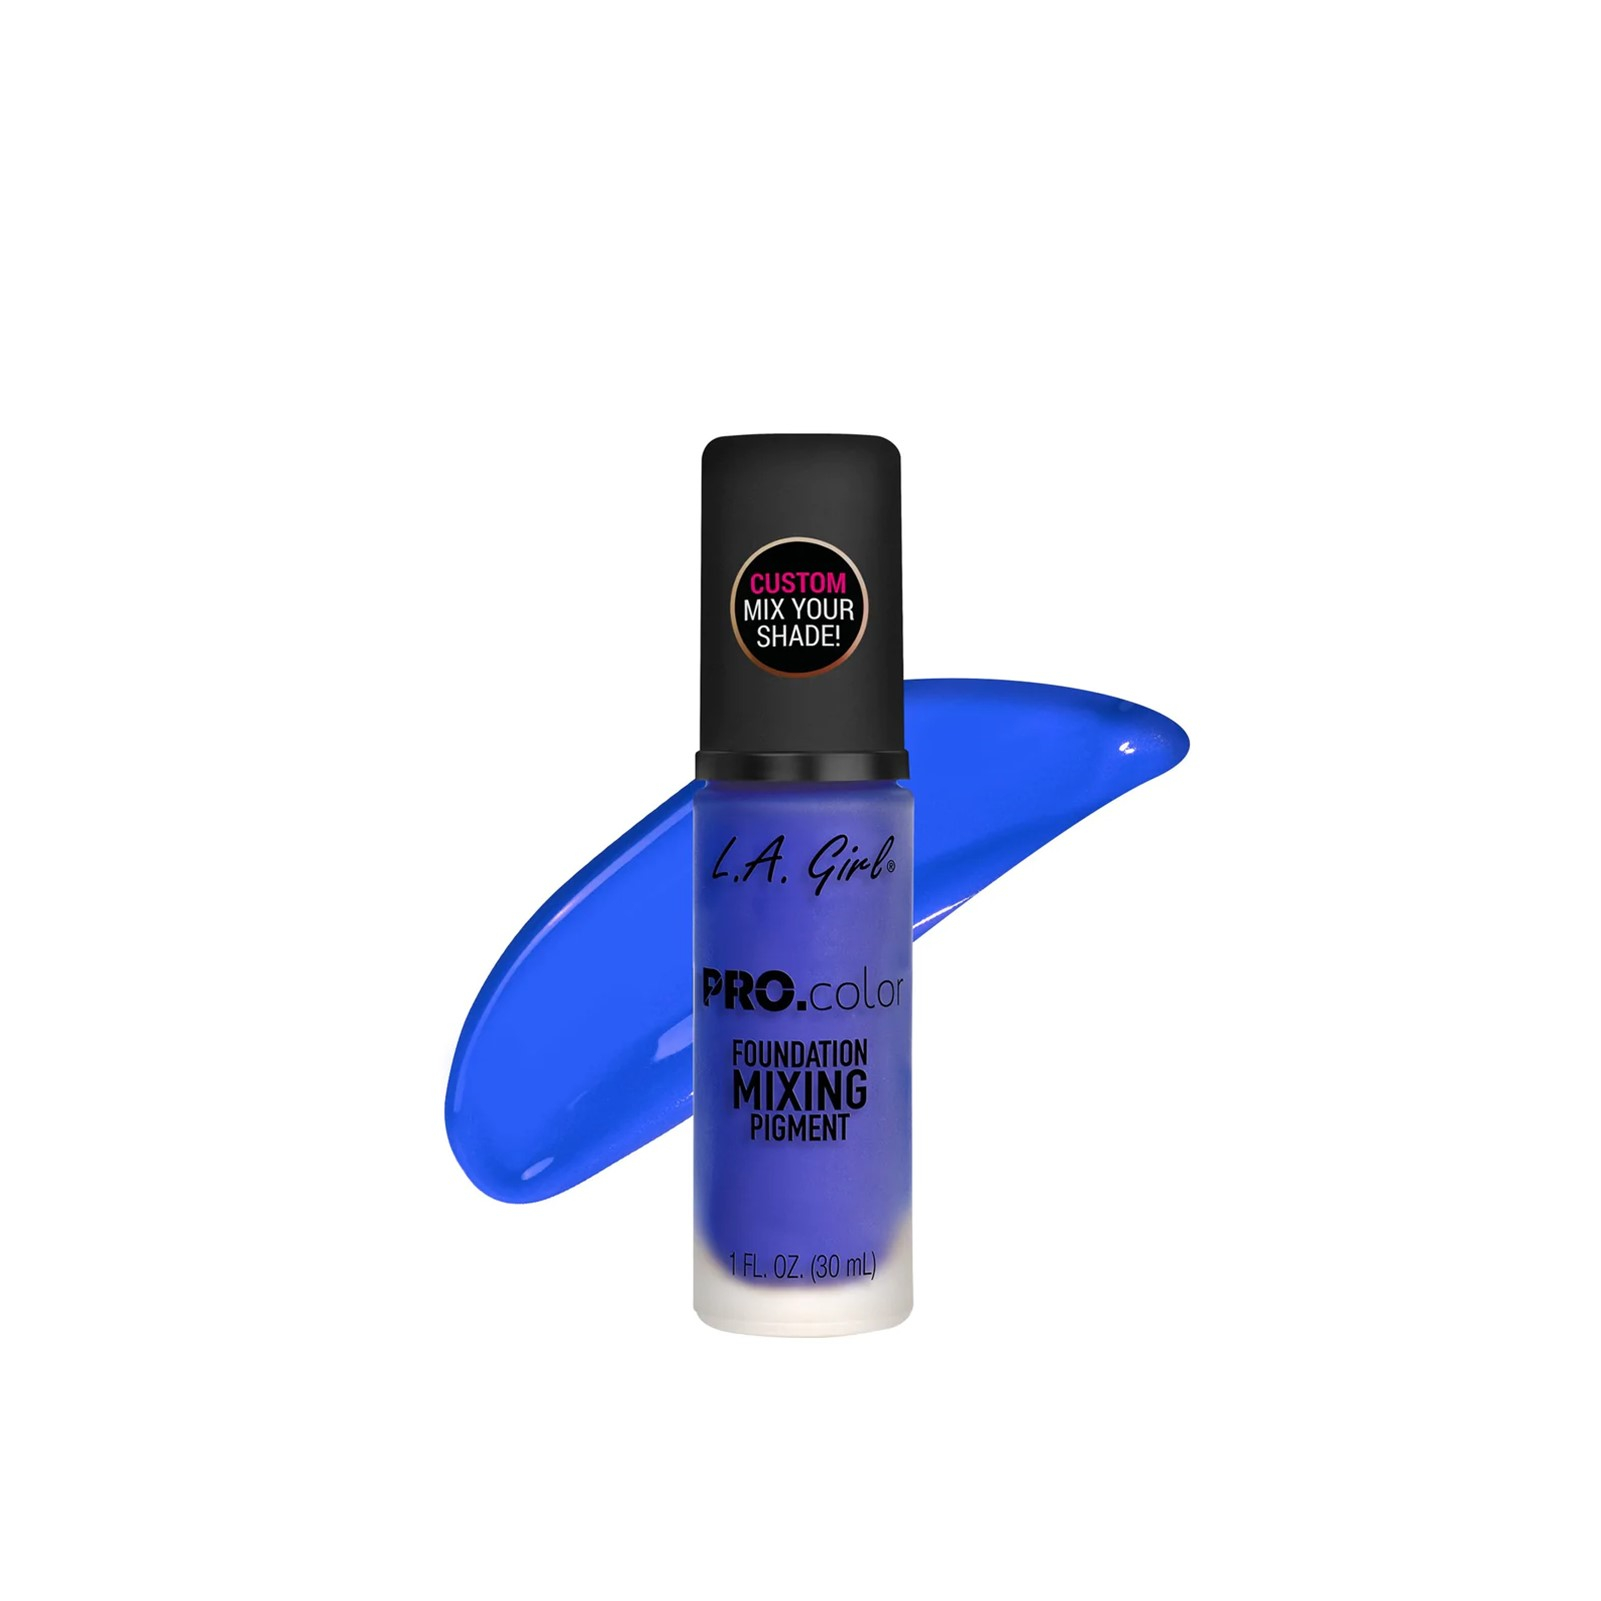 Buy L.A. Girl Pro Color Foundation Mixing Pigment Blue 30ml (1.0